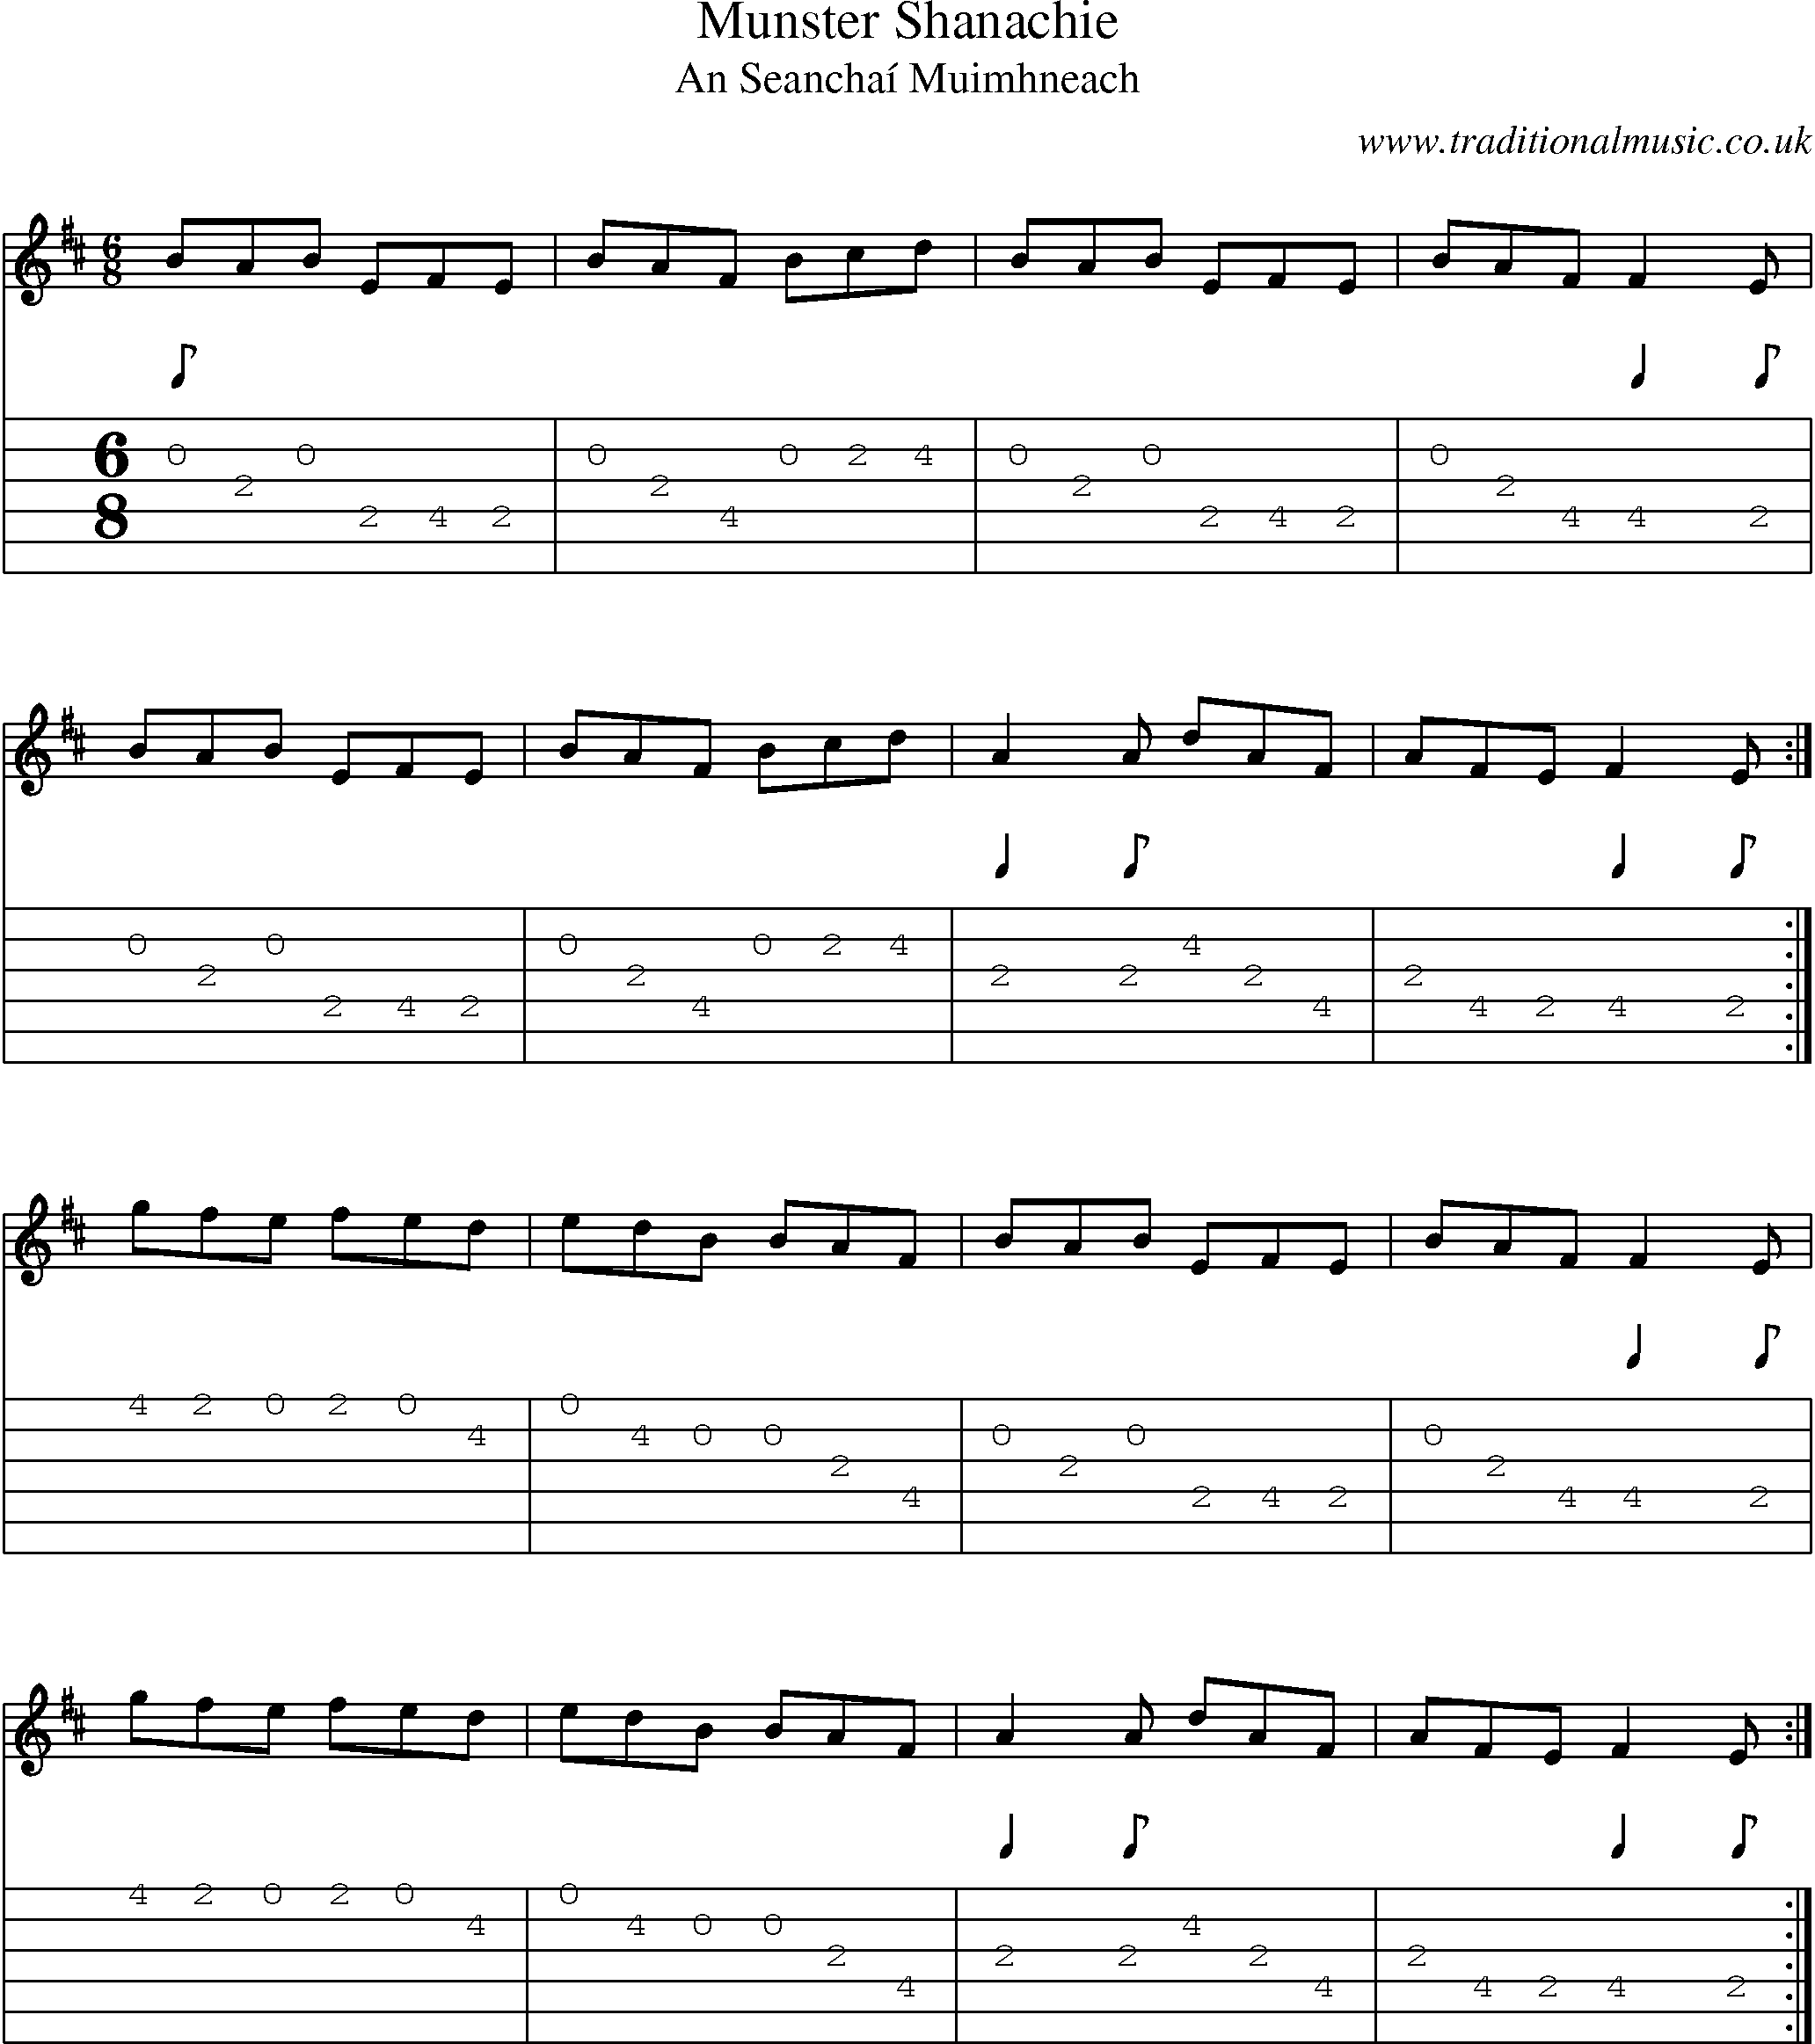 Music Score and Guitar Tabs for Munster Shanachie